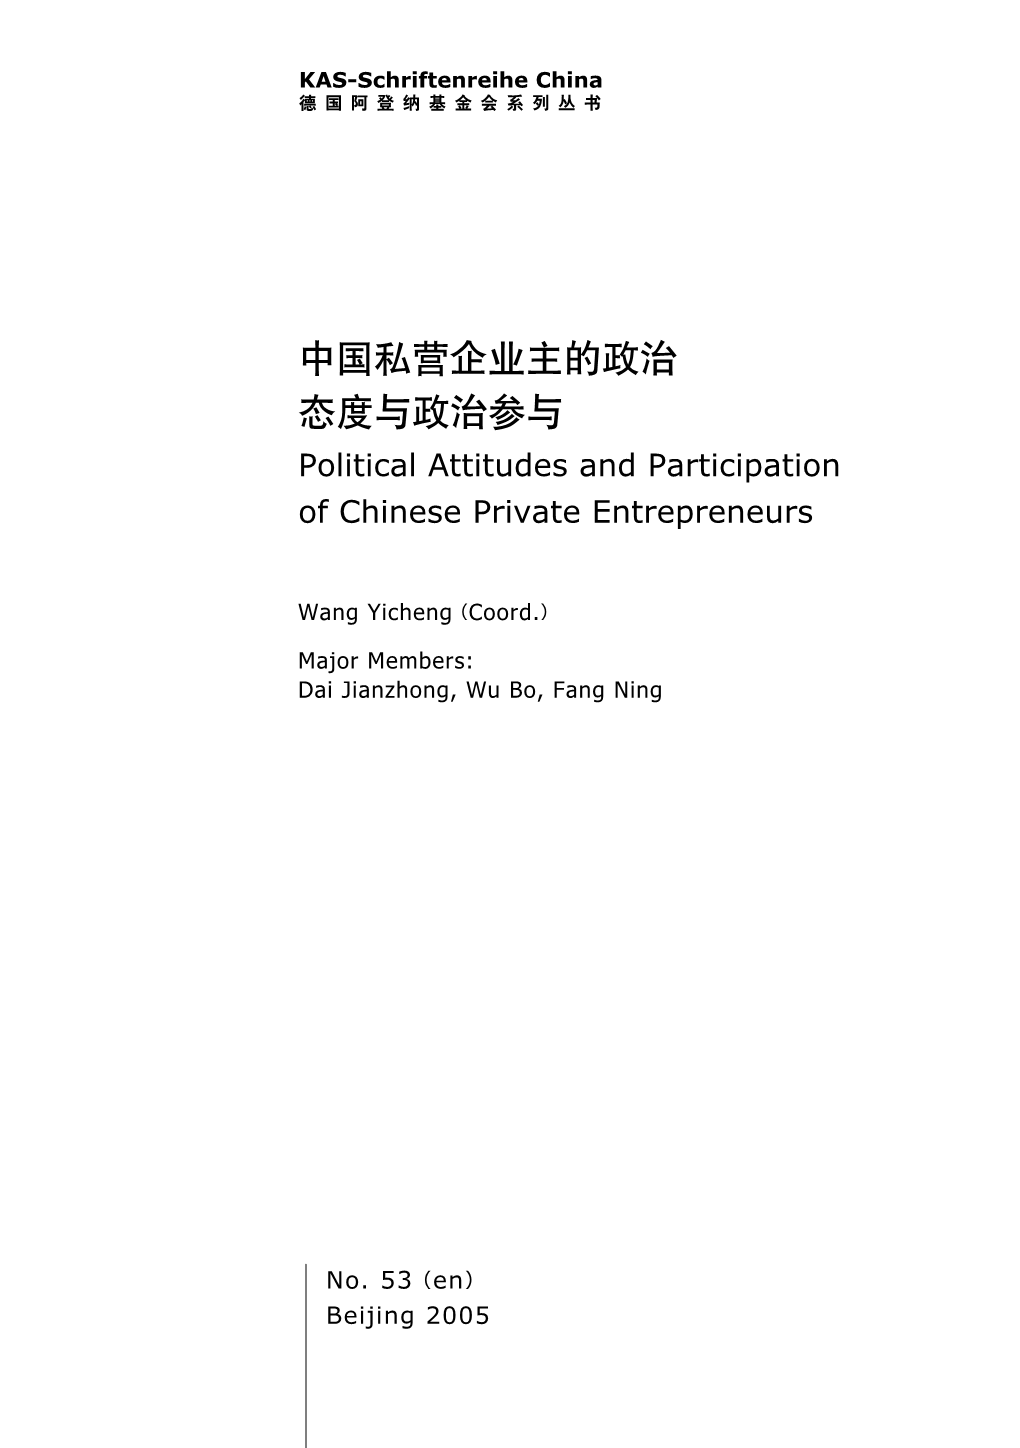 Political Attitudes and Participation of Chinese Private Entrepreneurs